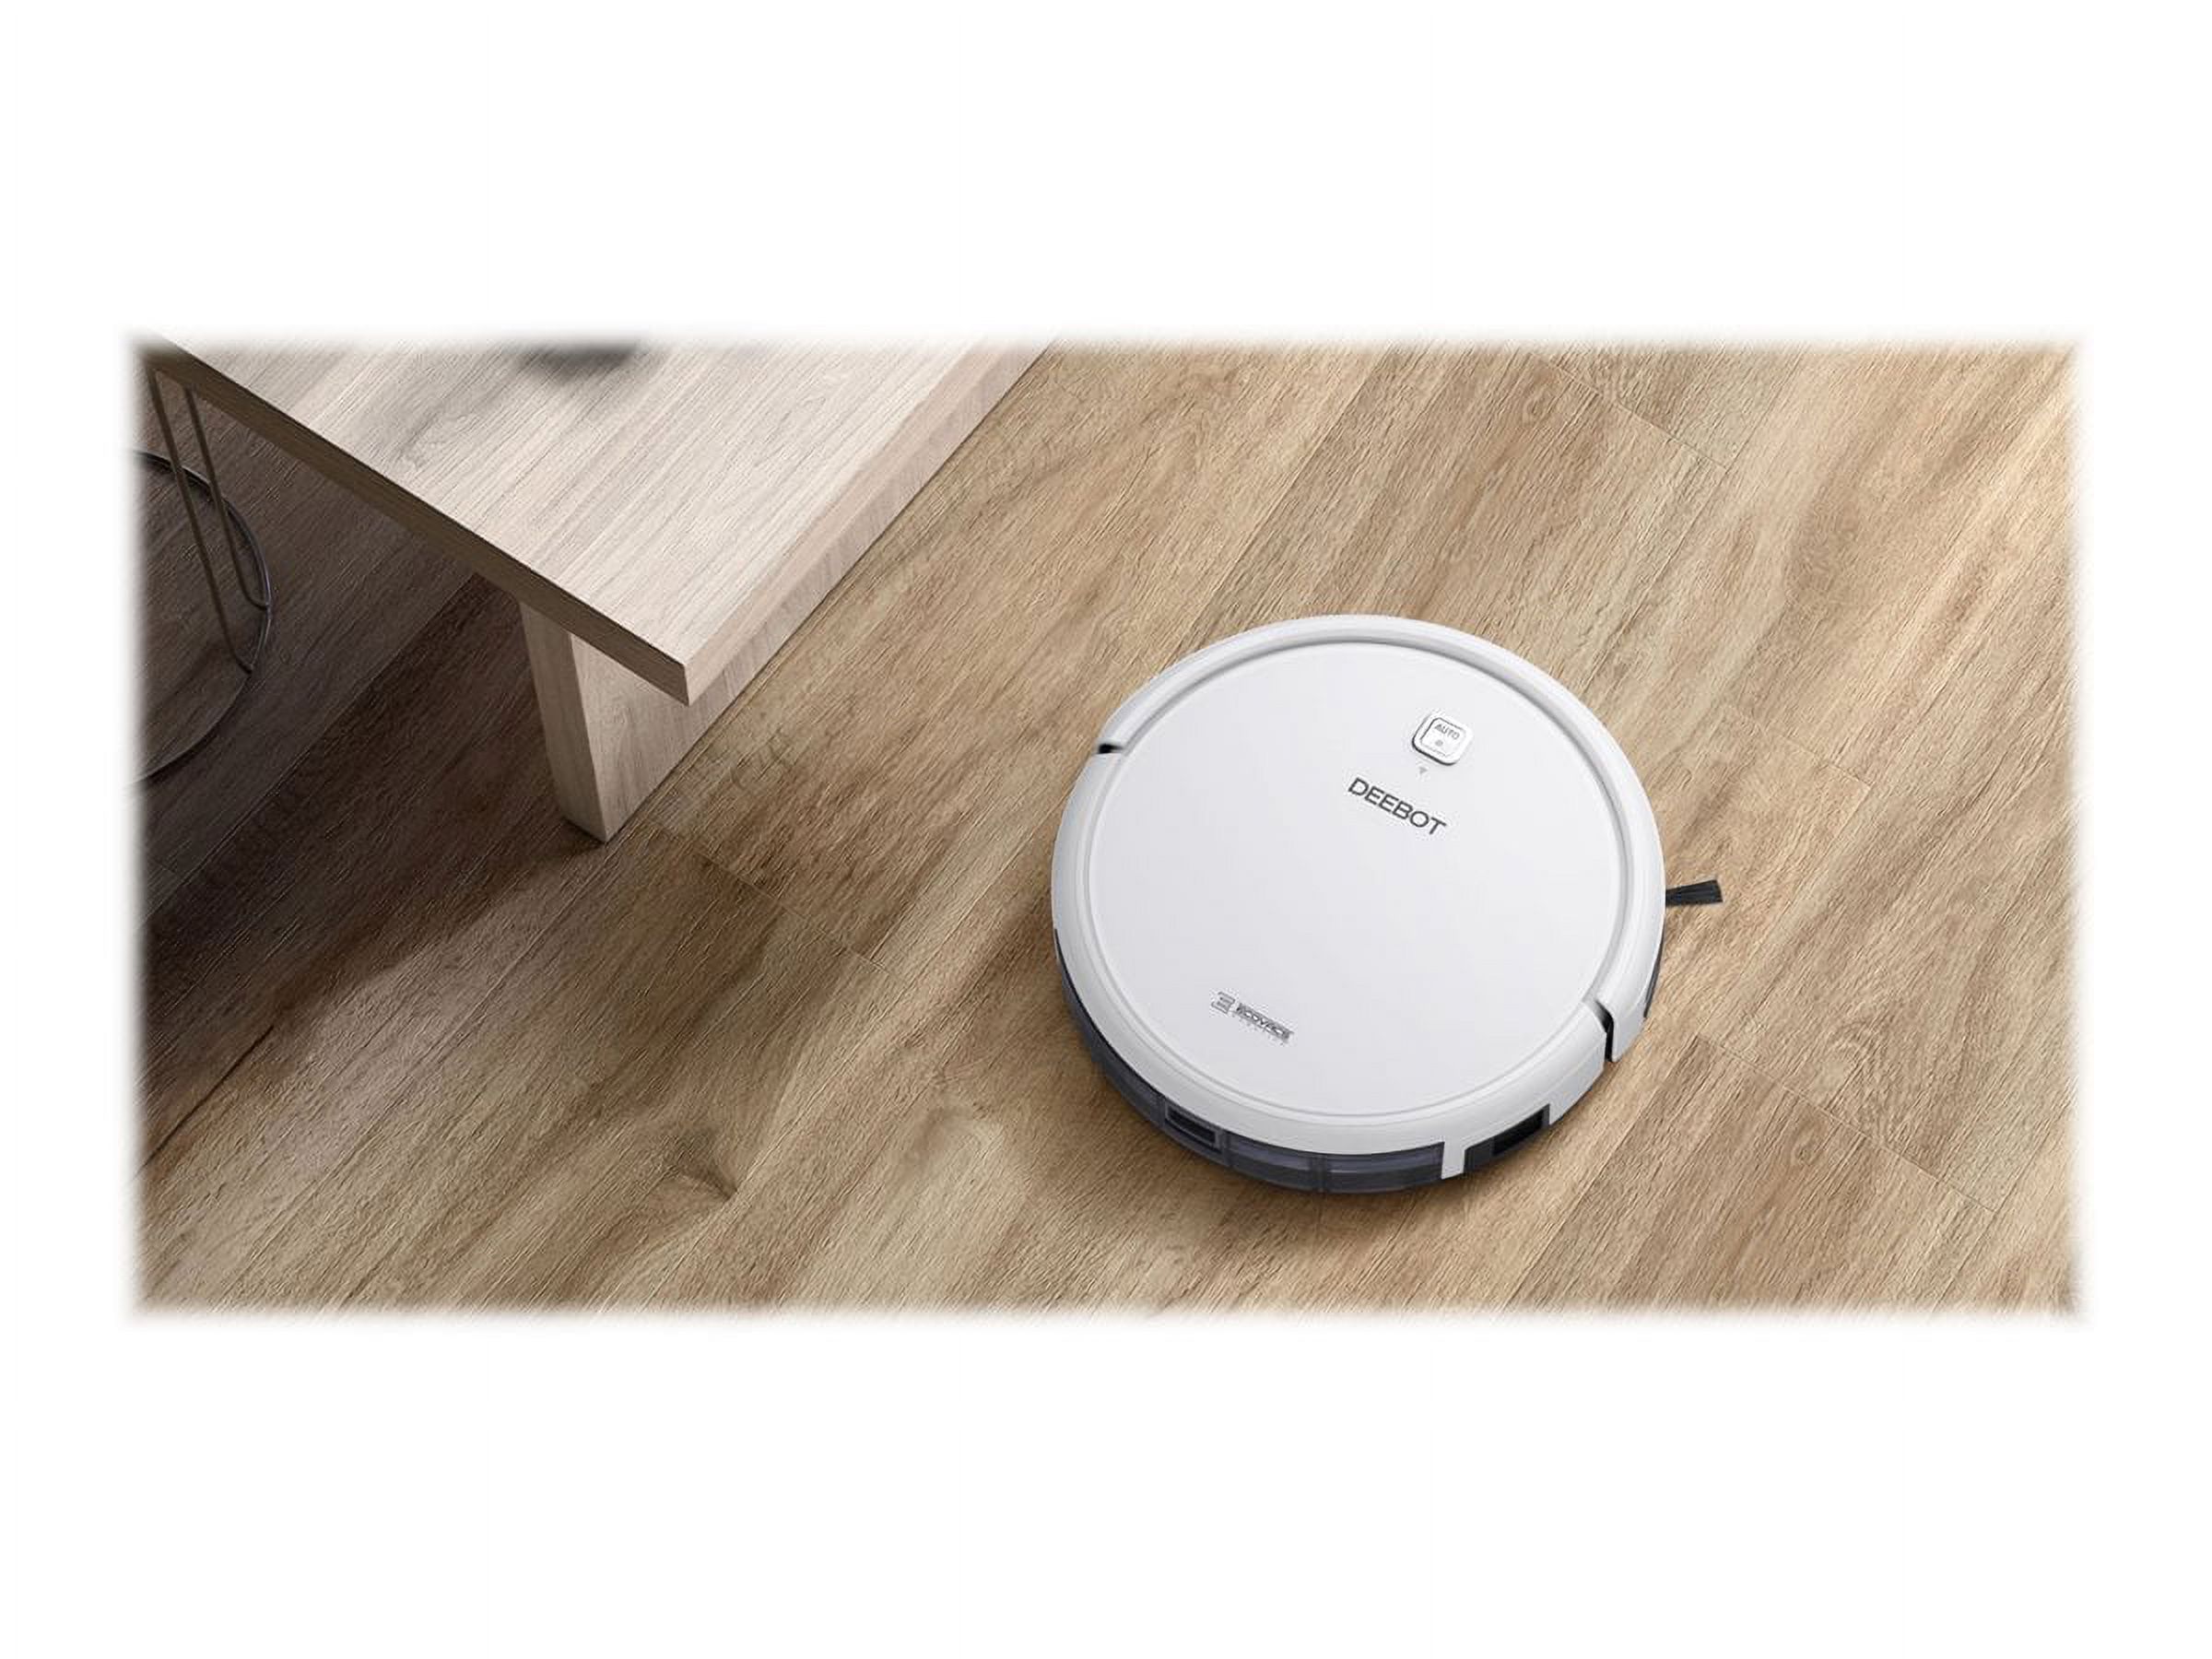 Ecovacs Deebot N79W Remote Control Home Robot Multi Surface Vacuum Cleaner - image 3 of 8